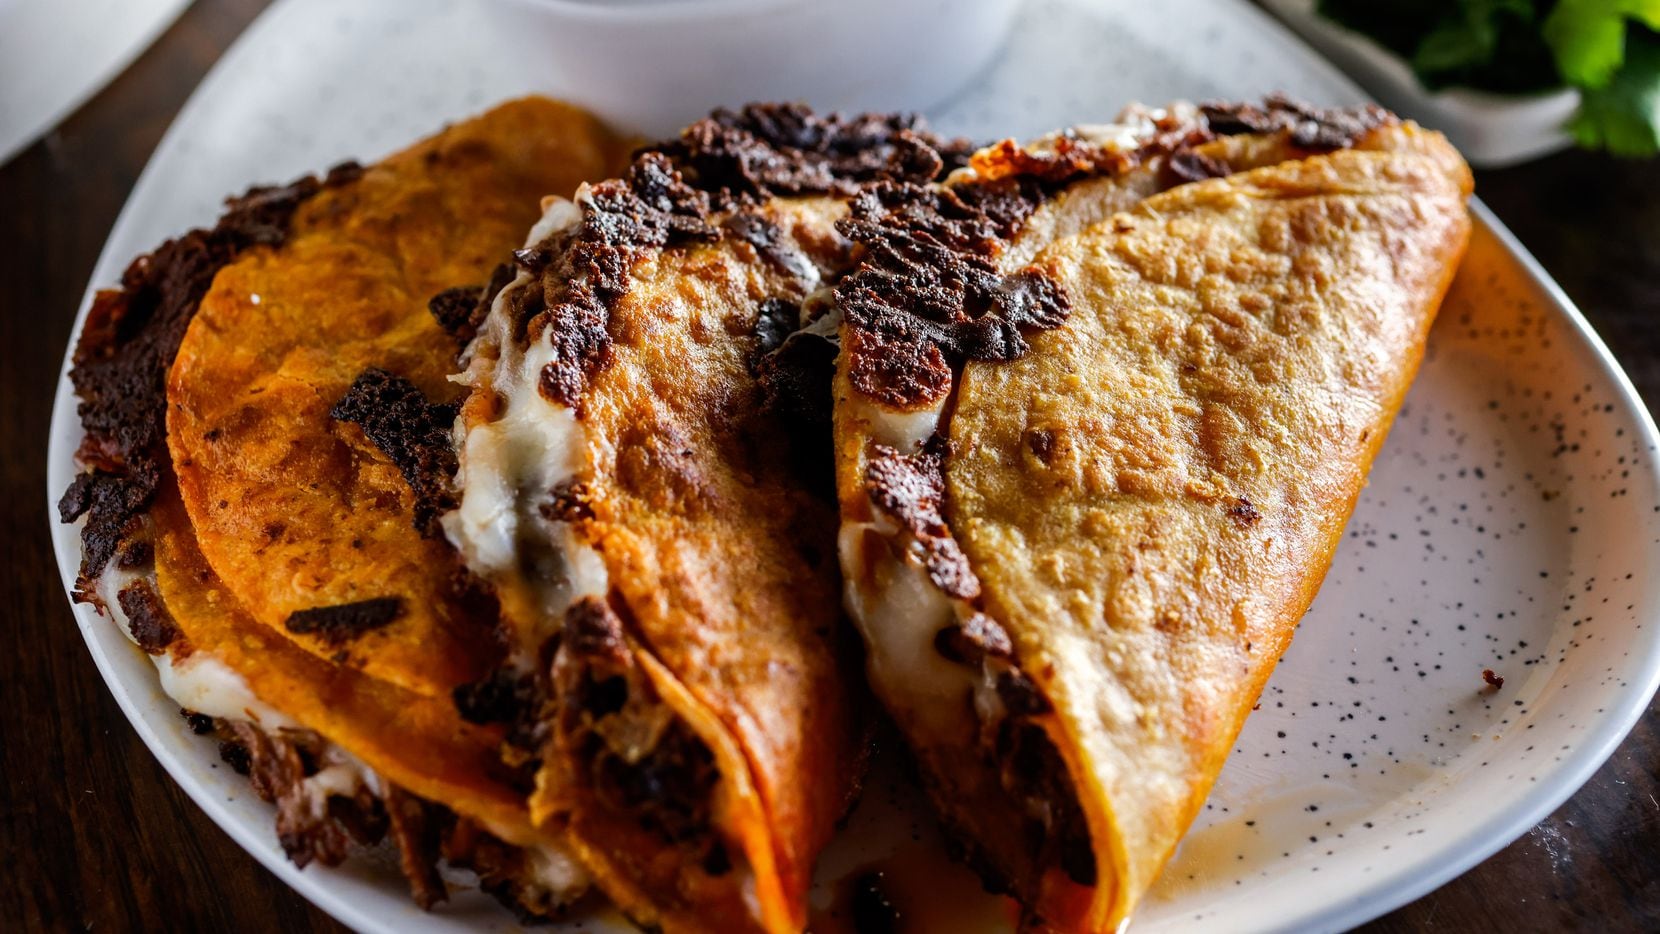 Tacos Dorados by Calisience in Ft. Worth on Thursday, Oct. 27, 2022.